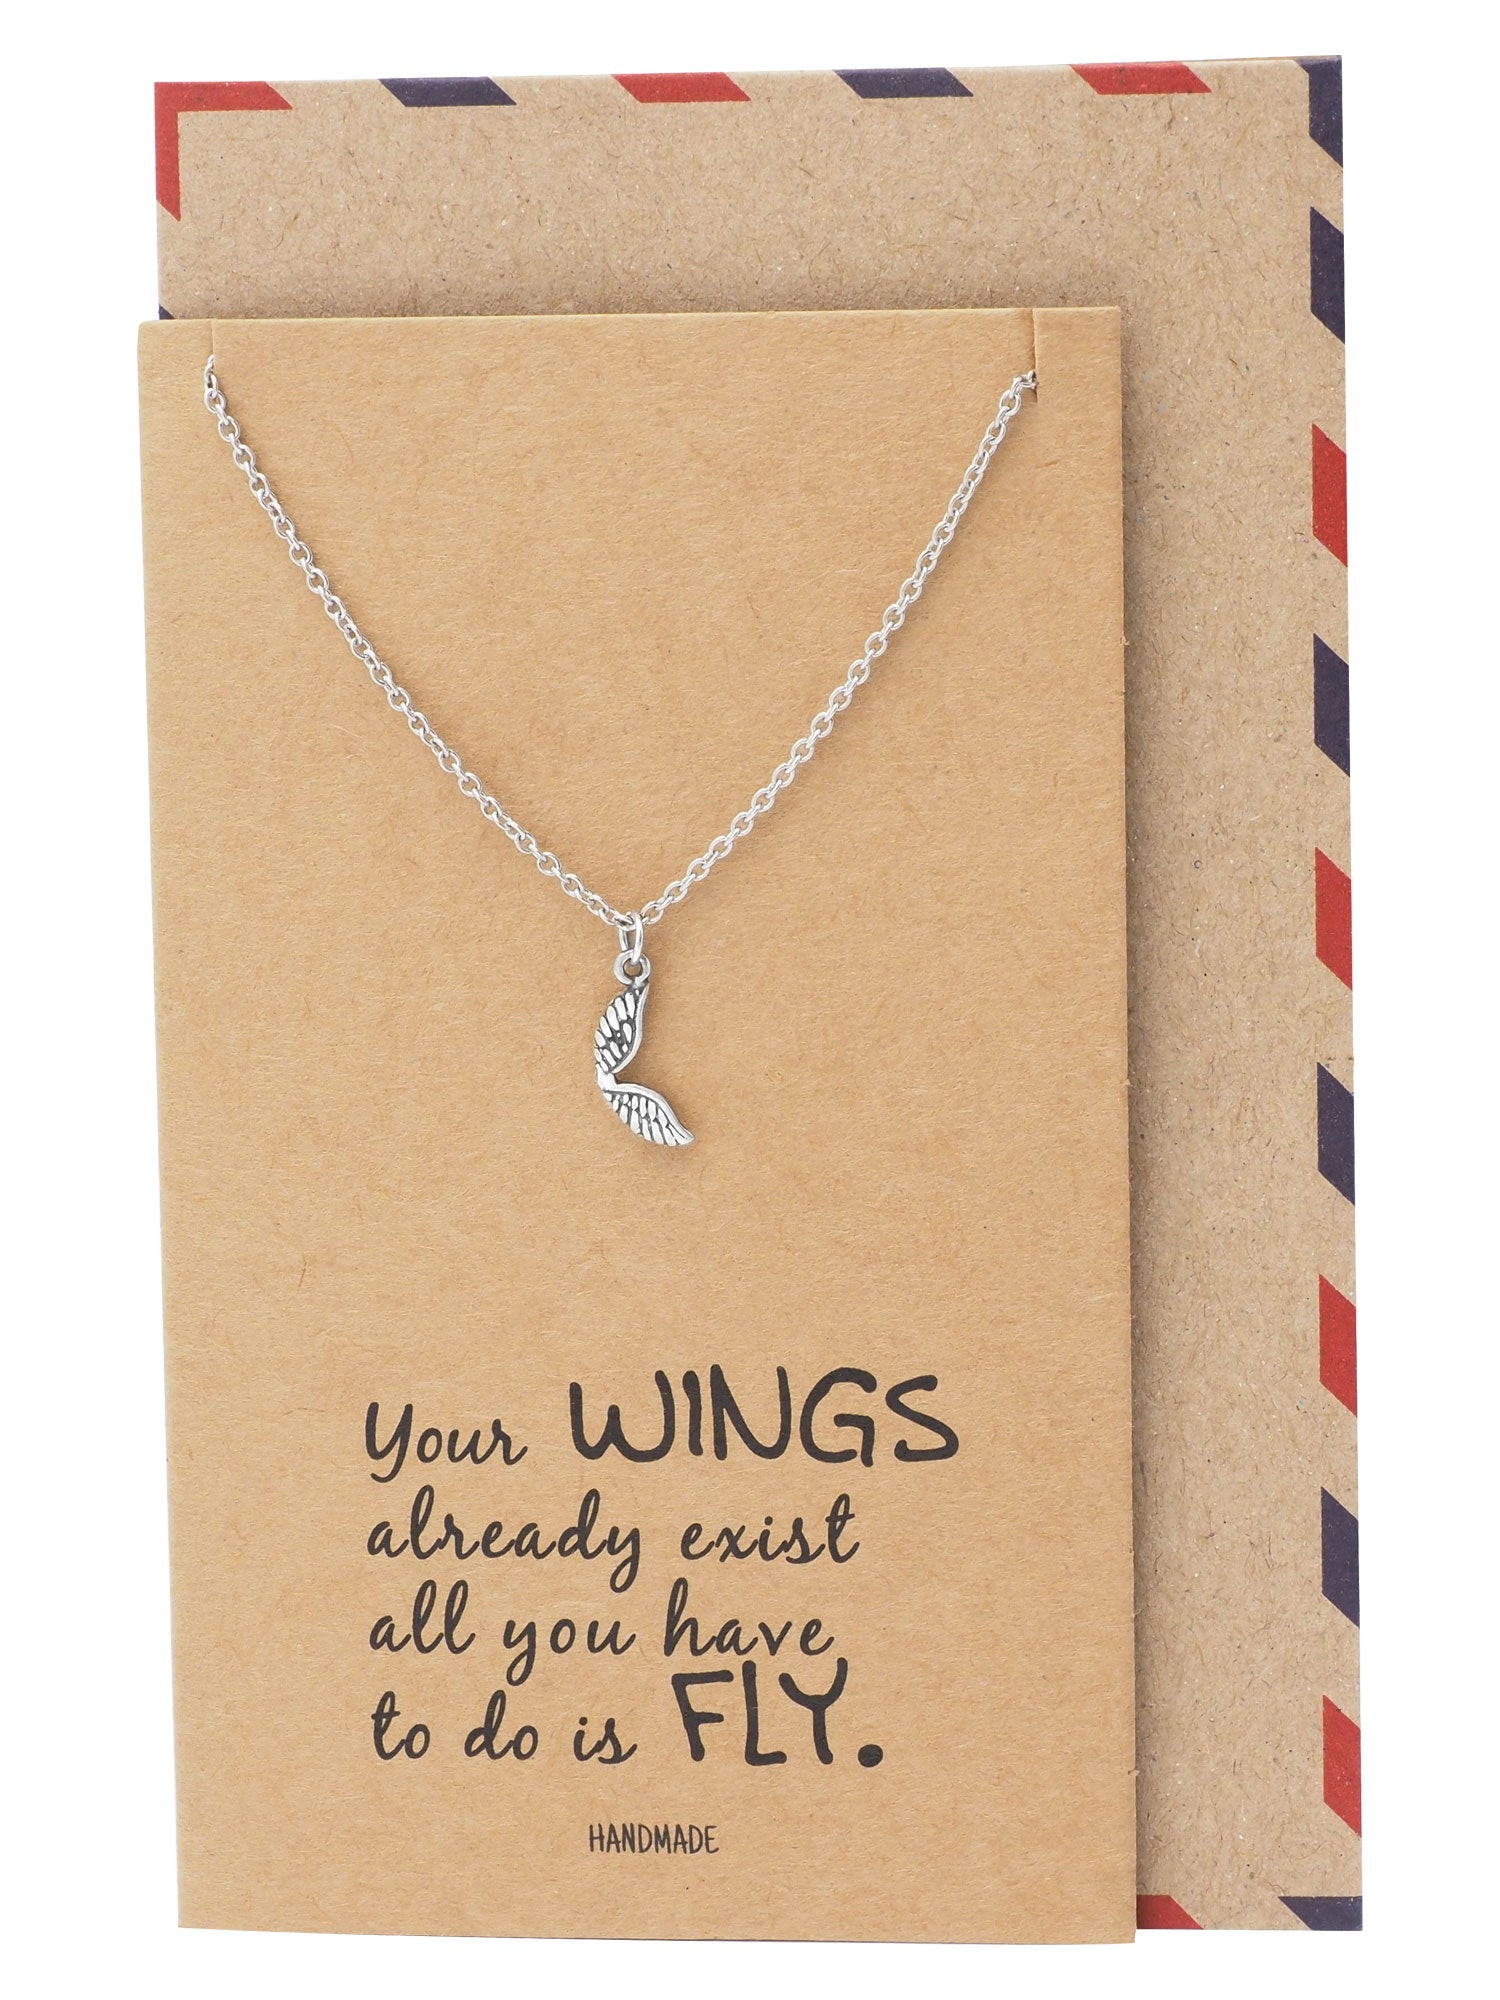 33 Thoughtful High School Graduation Gifts For Her That Show You Care -  Positivity is Pretty